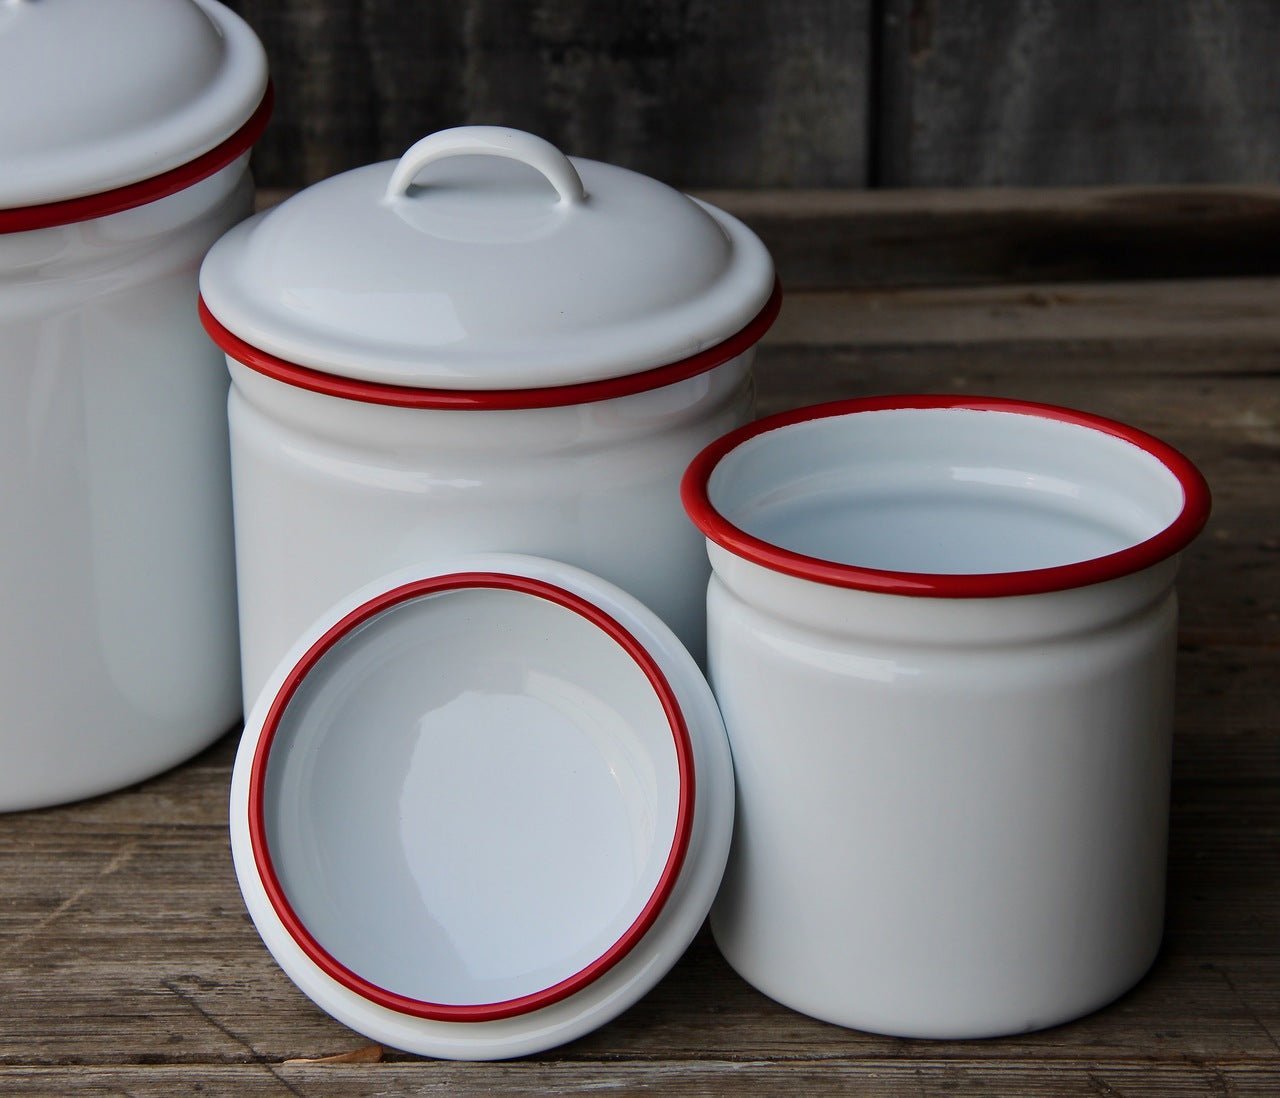 Four Piece Enamelware Kitchen Canister Set with Red Rim - Marmalade Mercantile